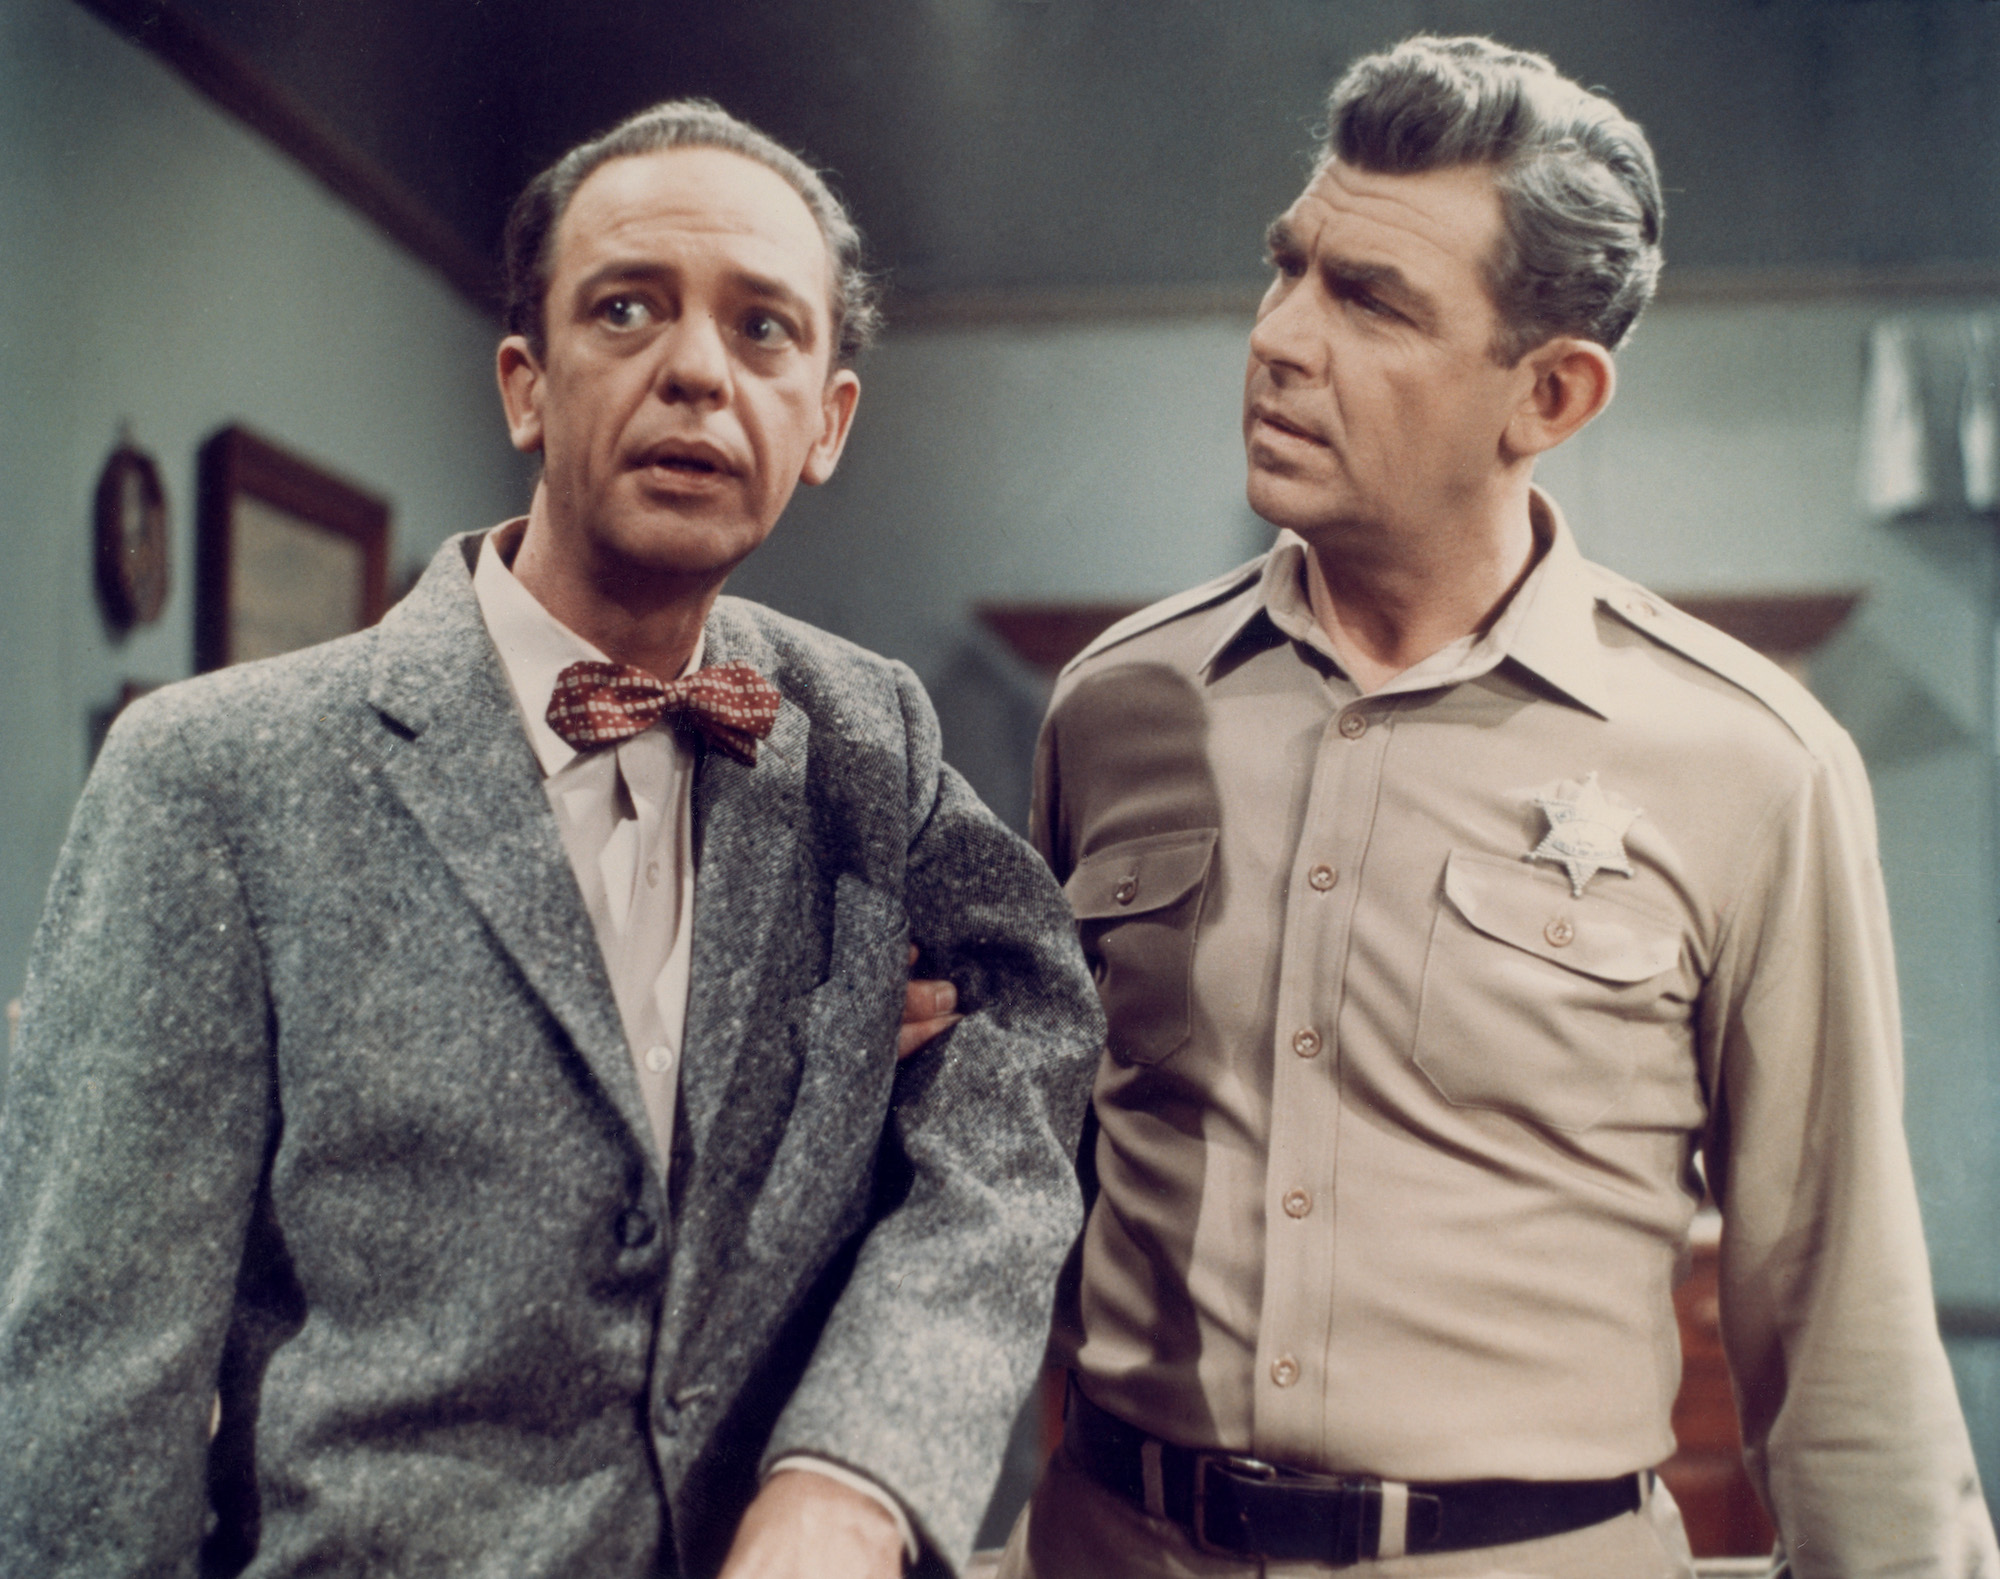 (L-R) Don Knotts as Deputy Barney Fife looking off to the left and Andy Griffith as Sheriff Andy Taylor looking at Knotts